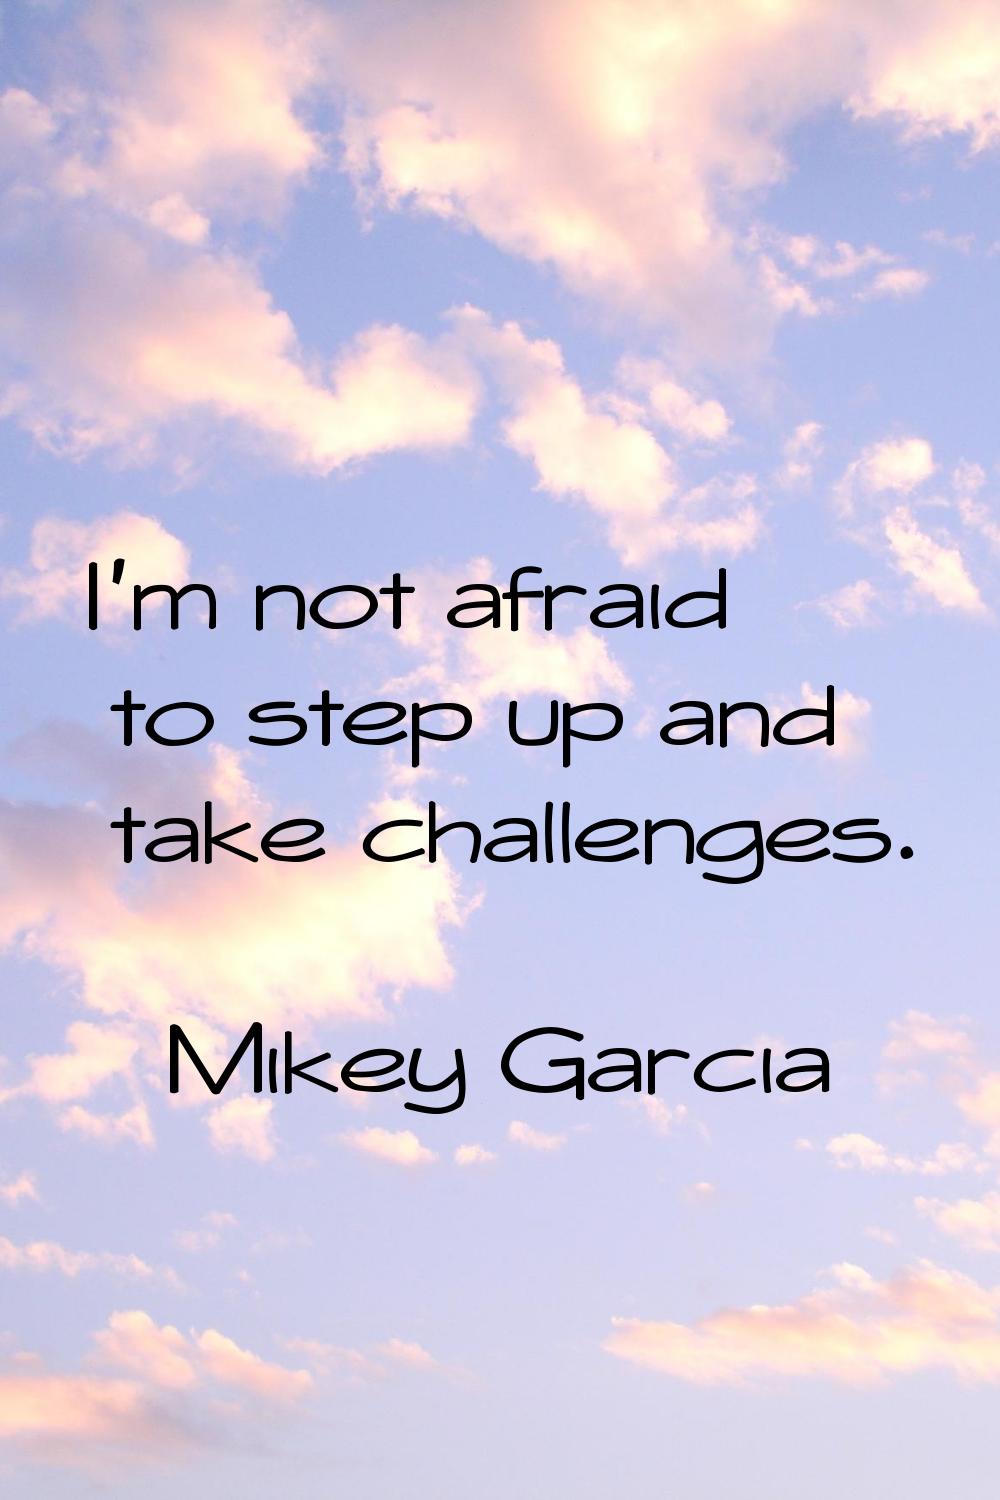 I'm not afraid to step up and take challenges.